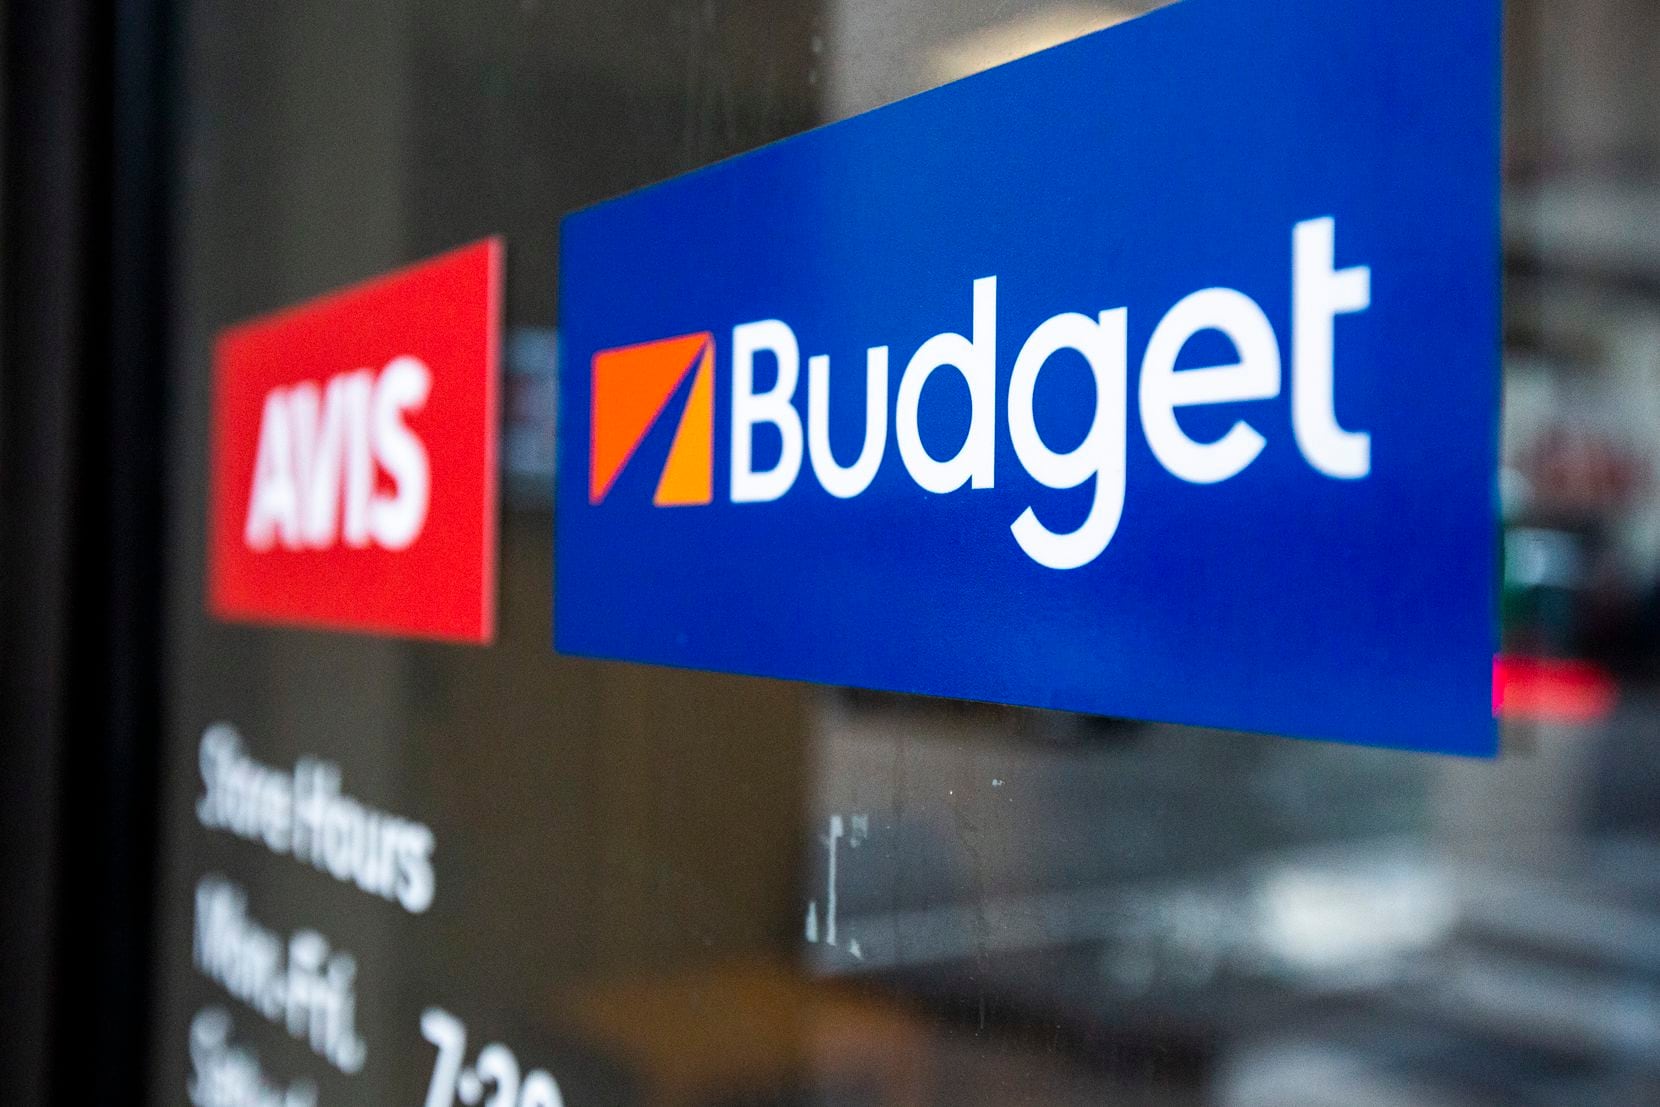 The Budget and Avis office in downtown Dallas on Thursday, Feb. 13, 2020. (Lynda M. Gonzalez/The Dallas Morning News)